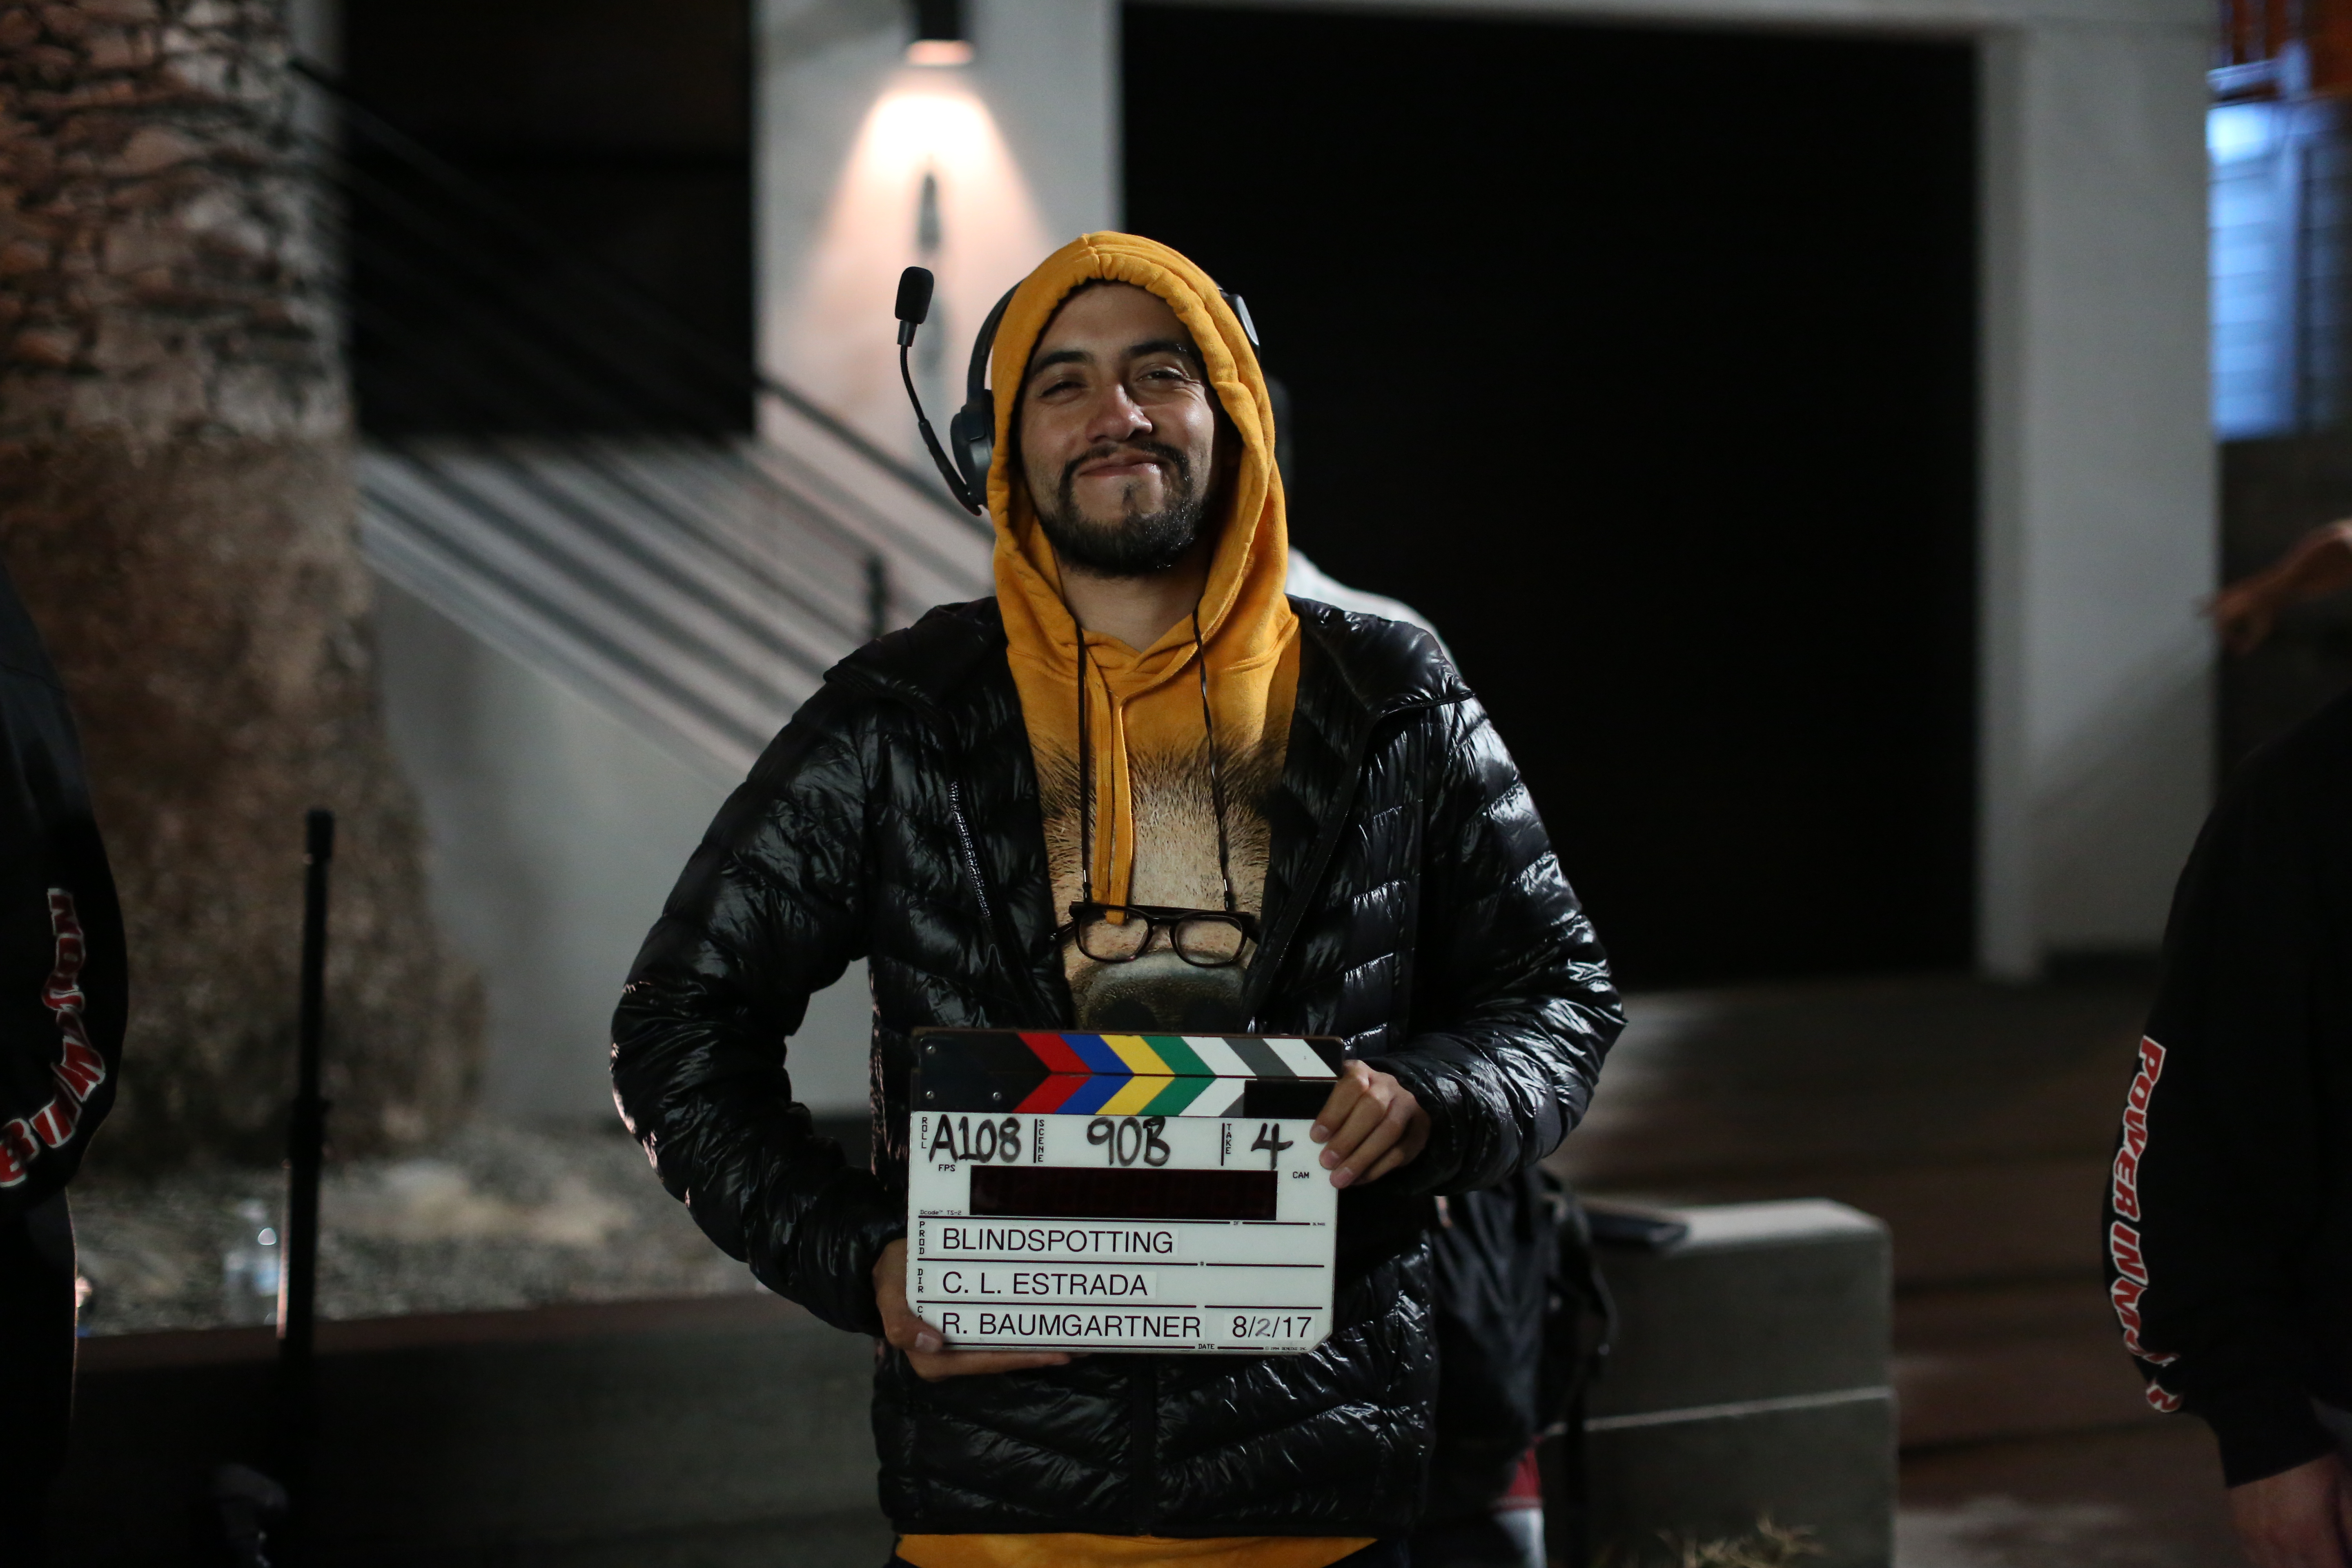 Carlos on set holding a clapperboard.